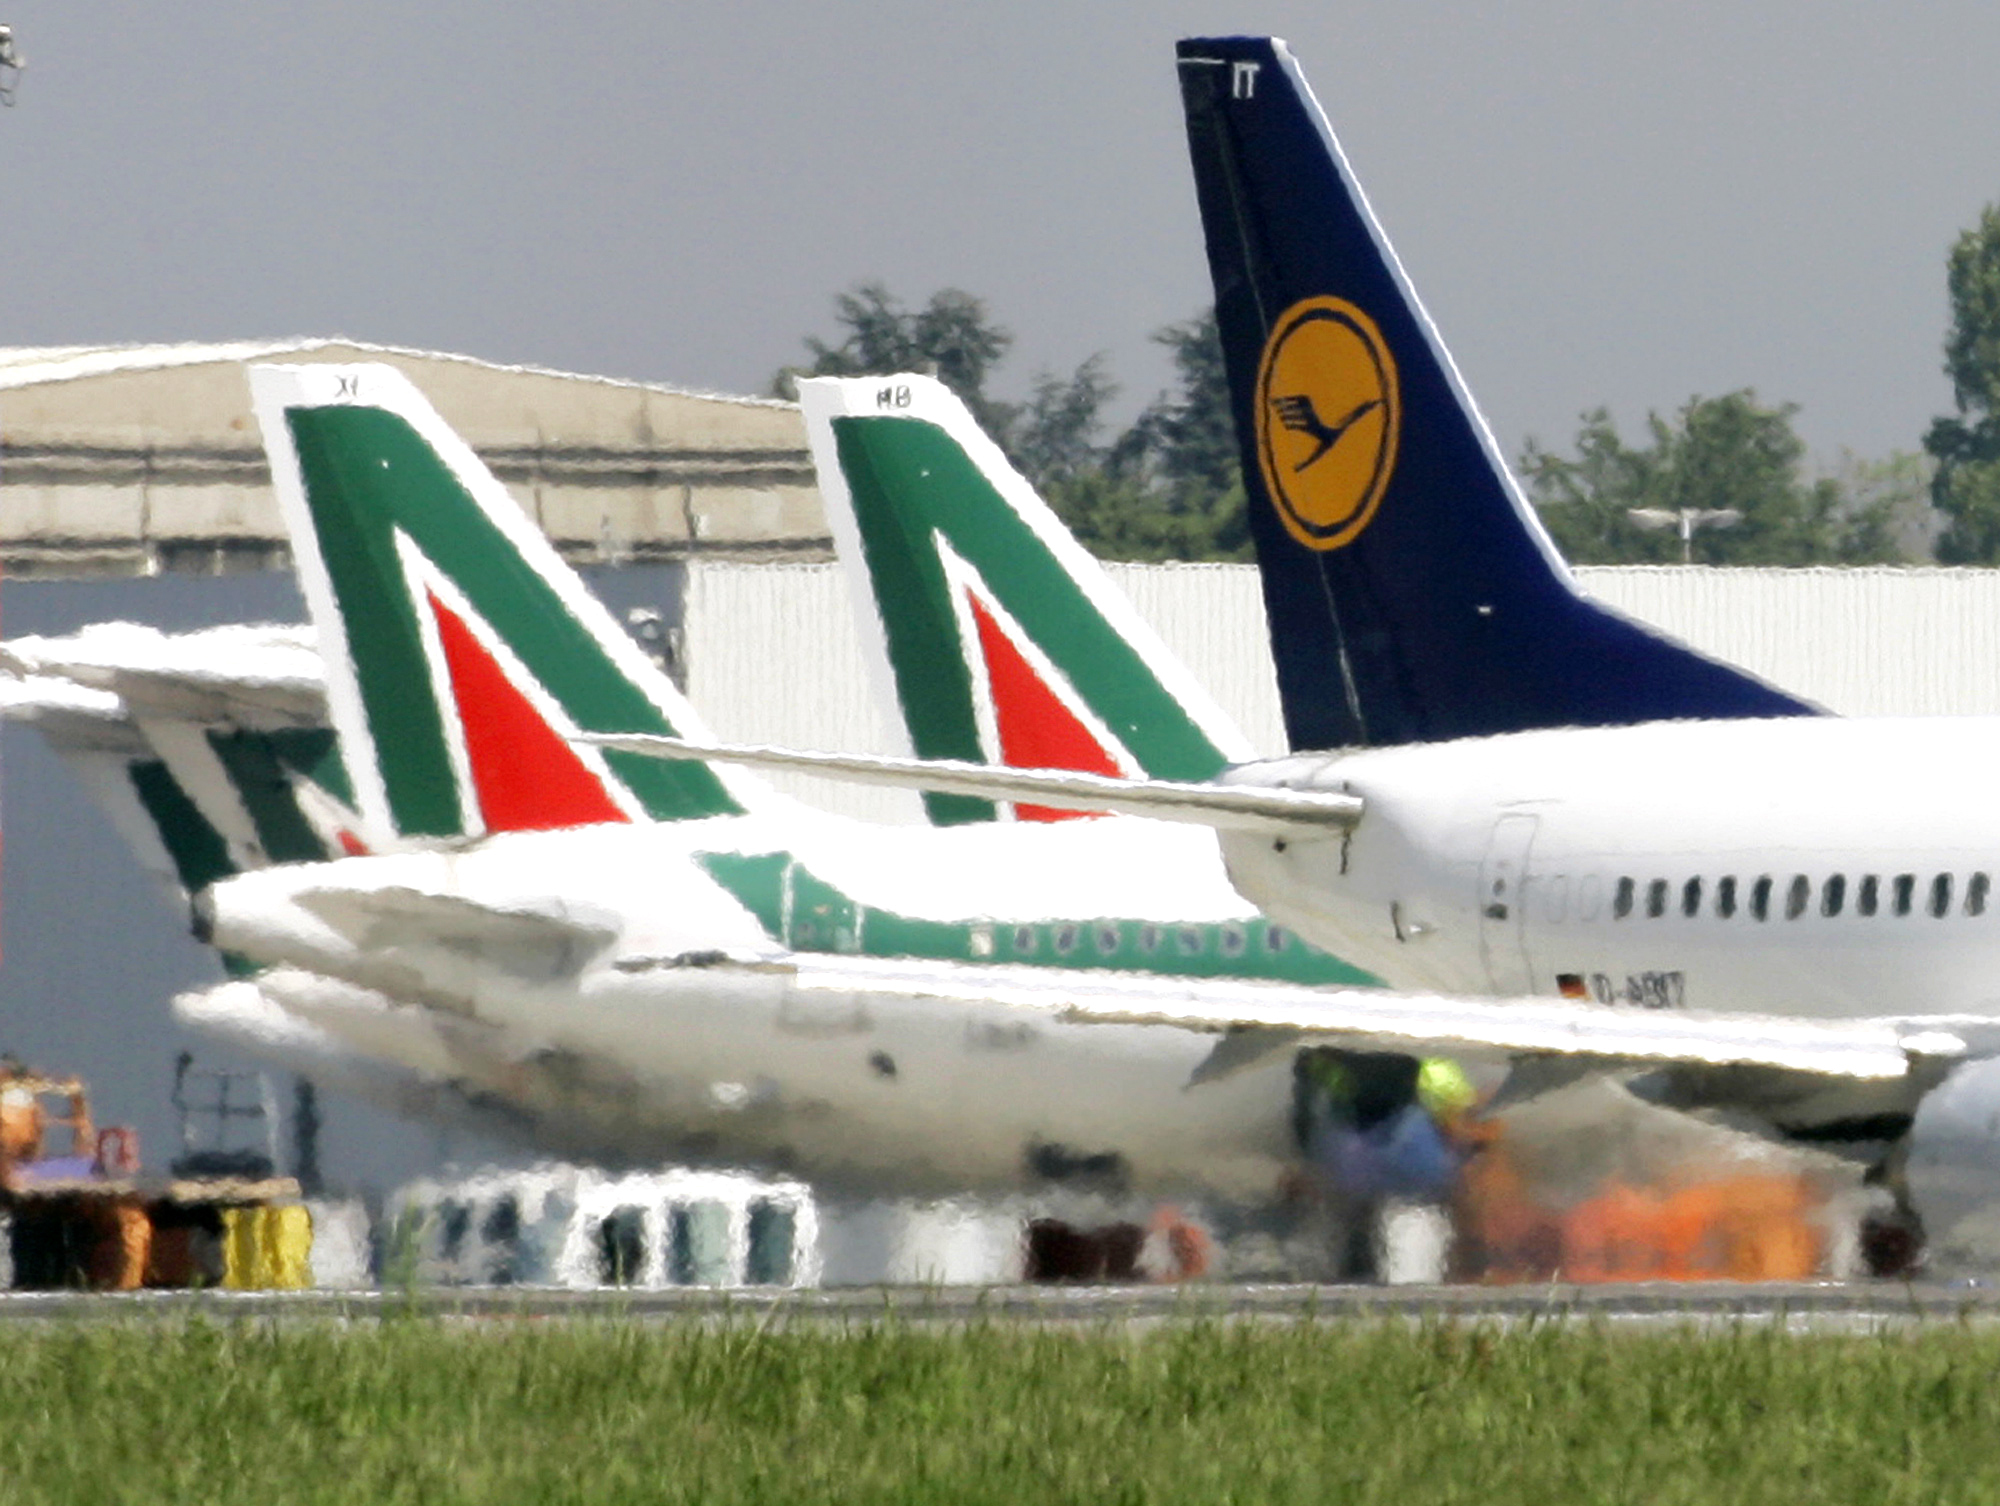 Air Italy is the nation's second largest carrier behind Alitalia.